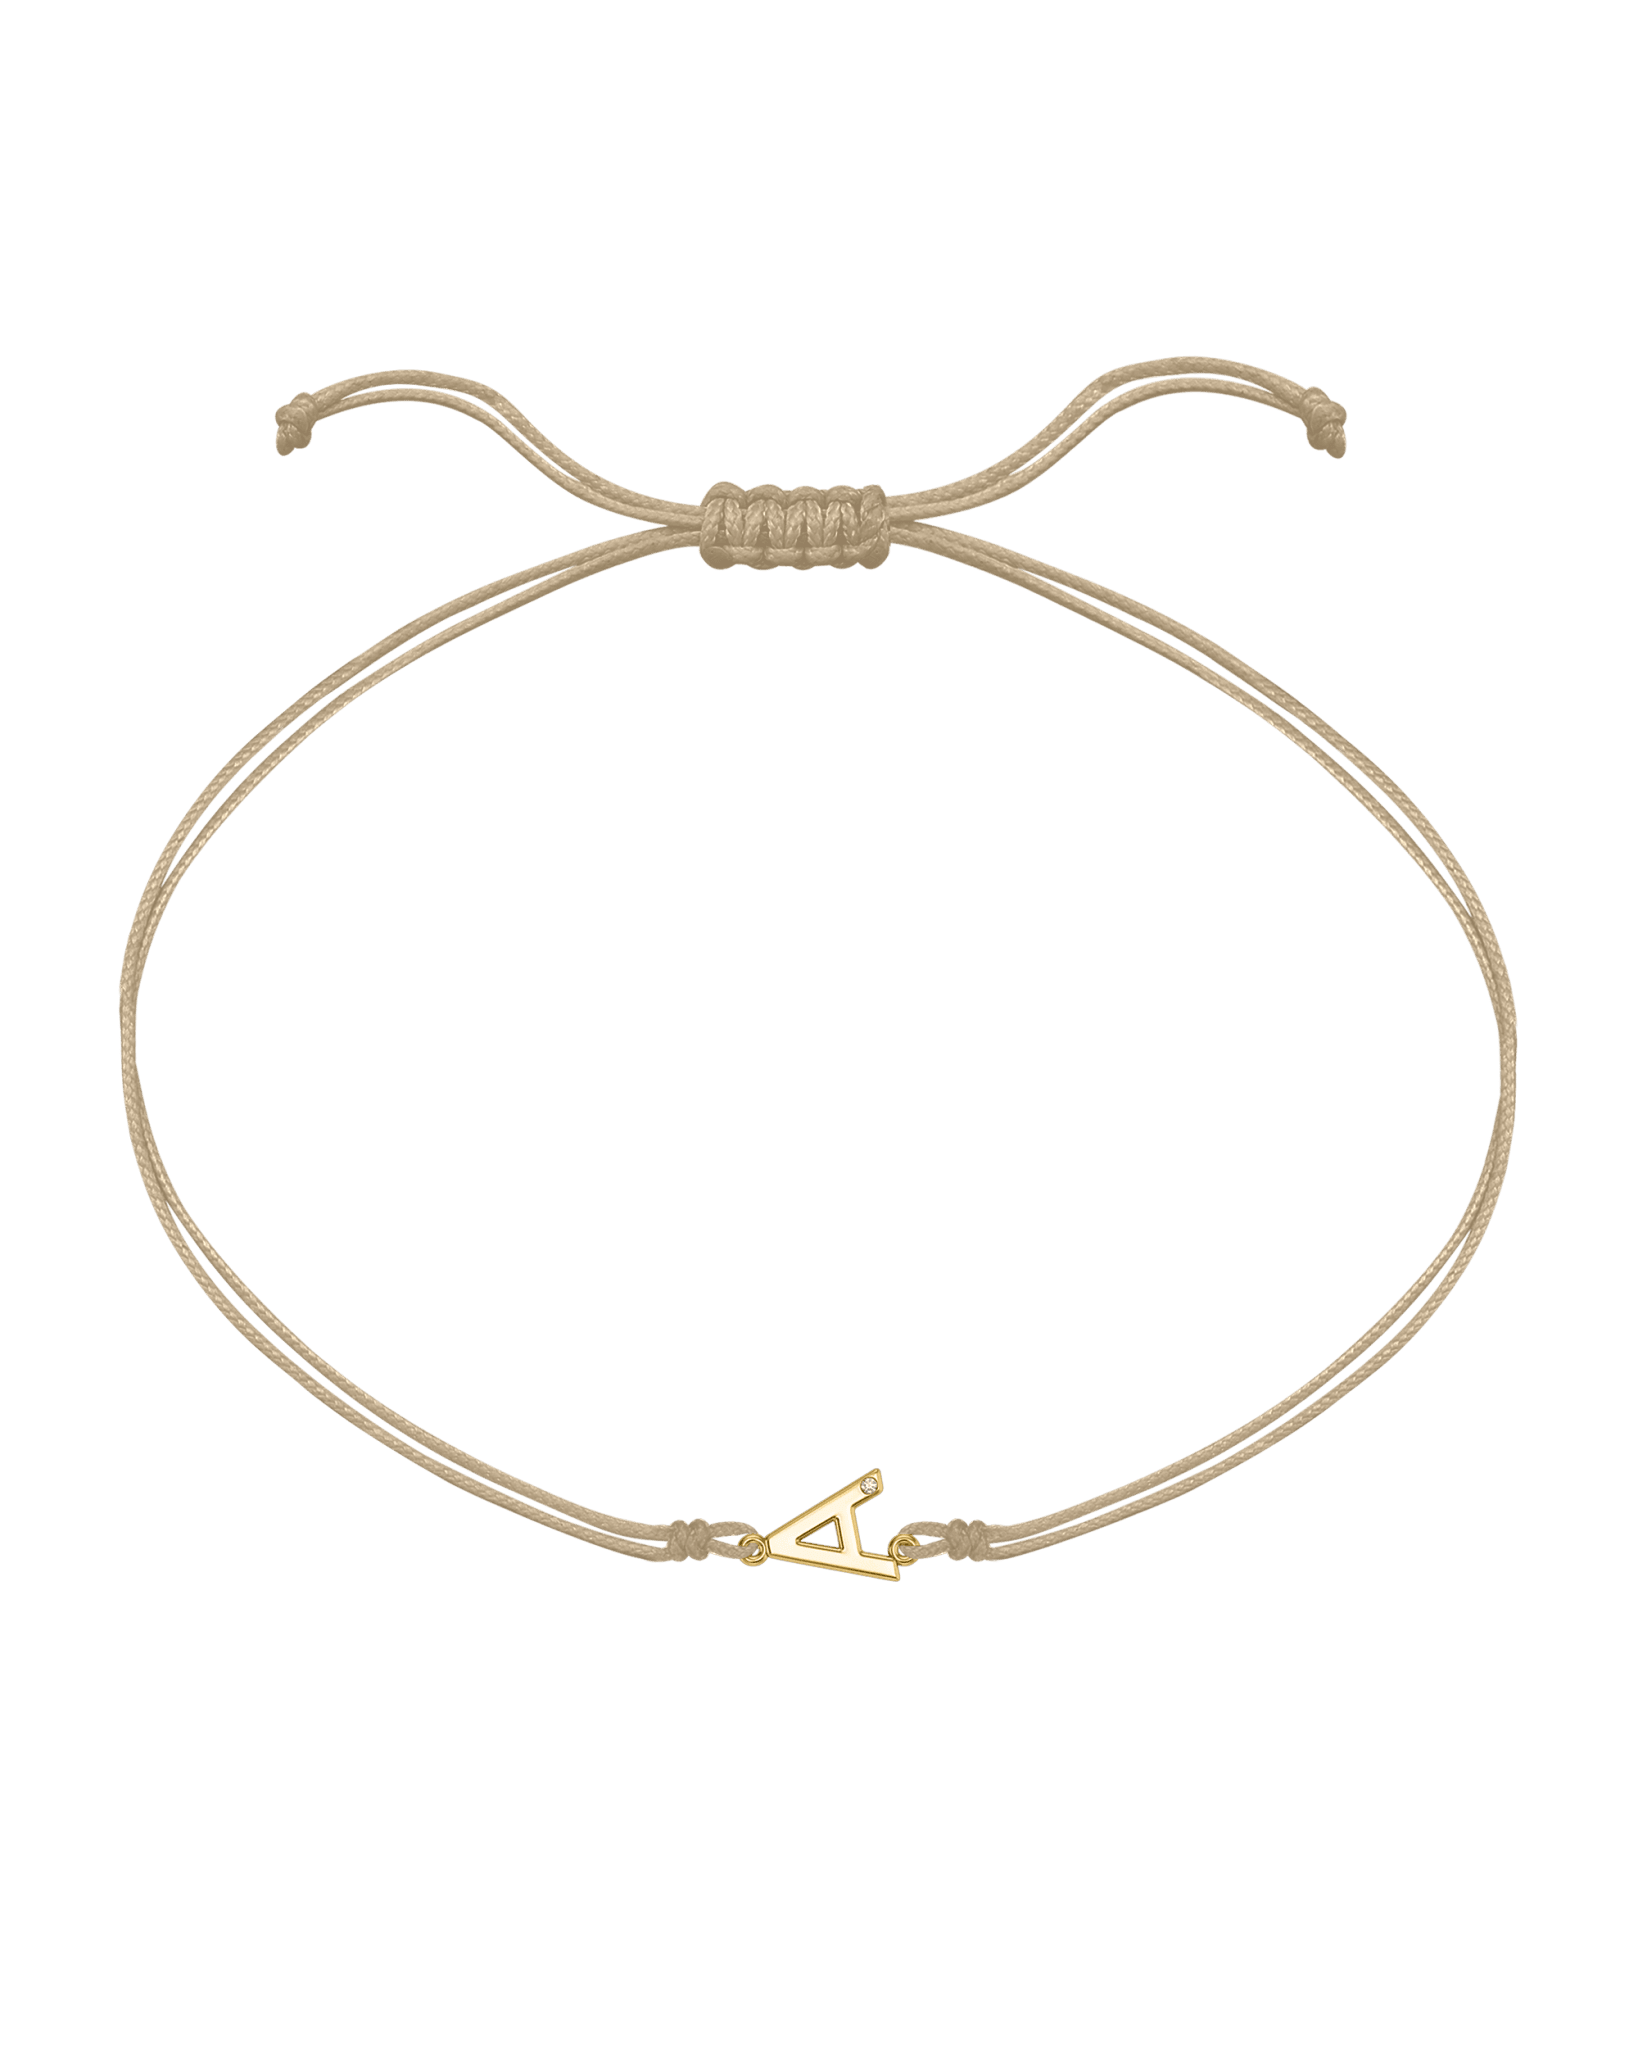 Initial String of Love - 14K Yellow Gold Bracelets 14K Solid Gold Sand 